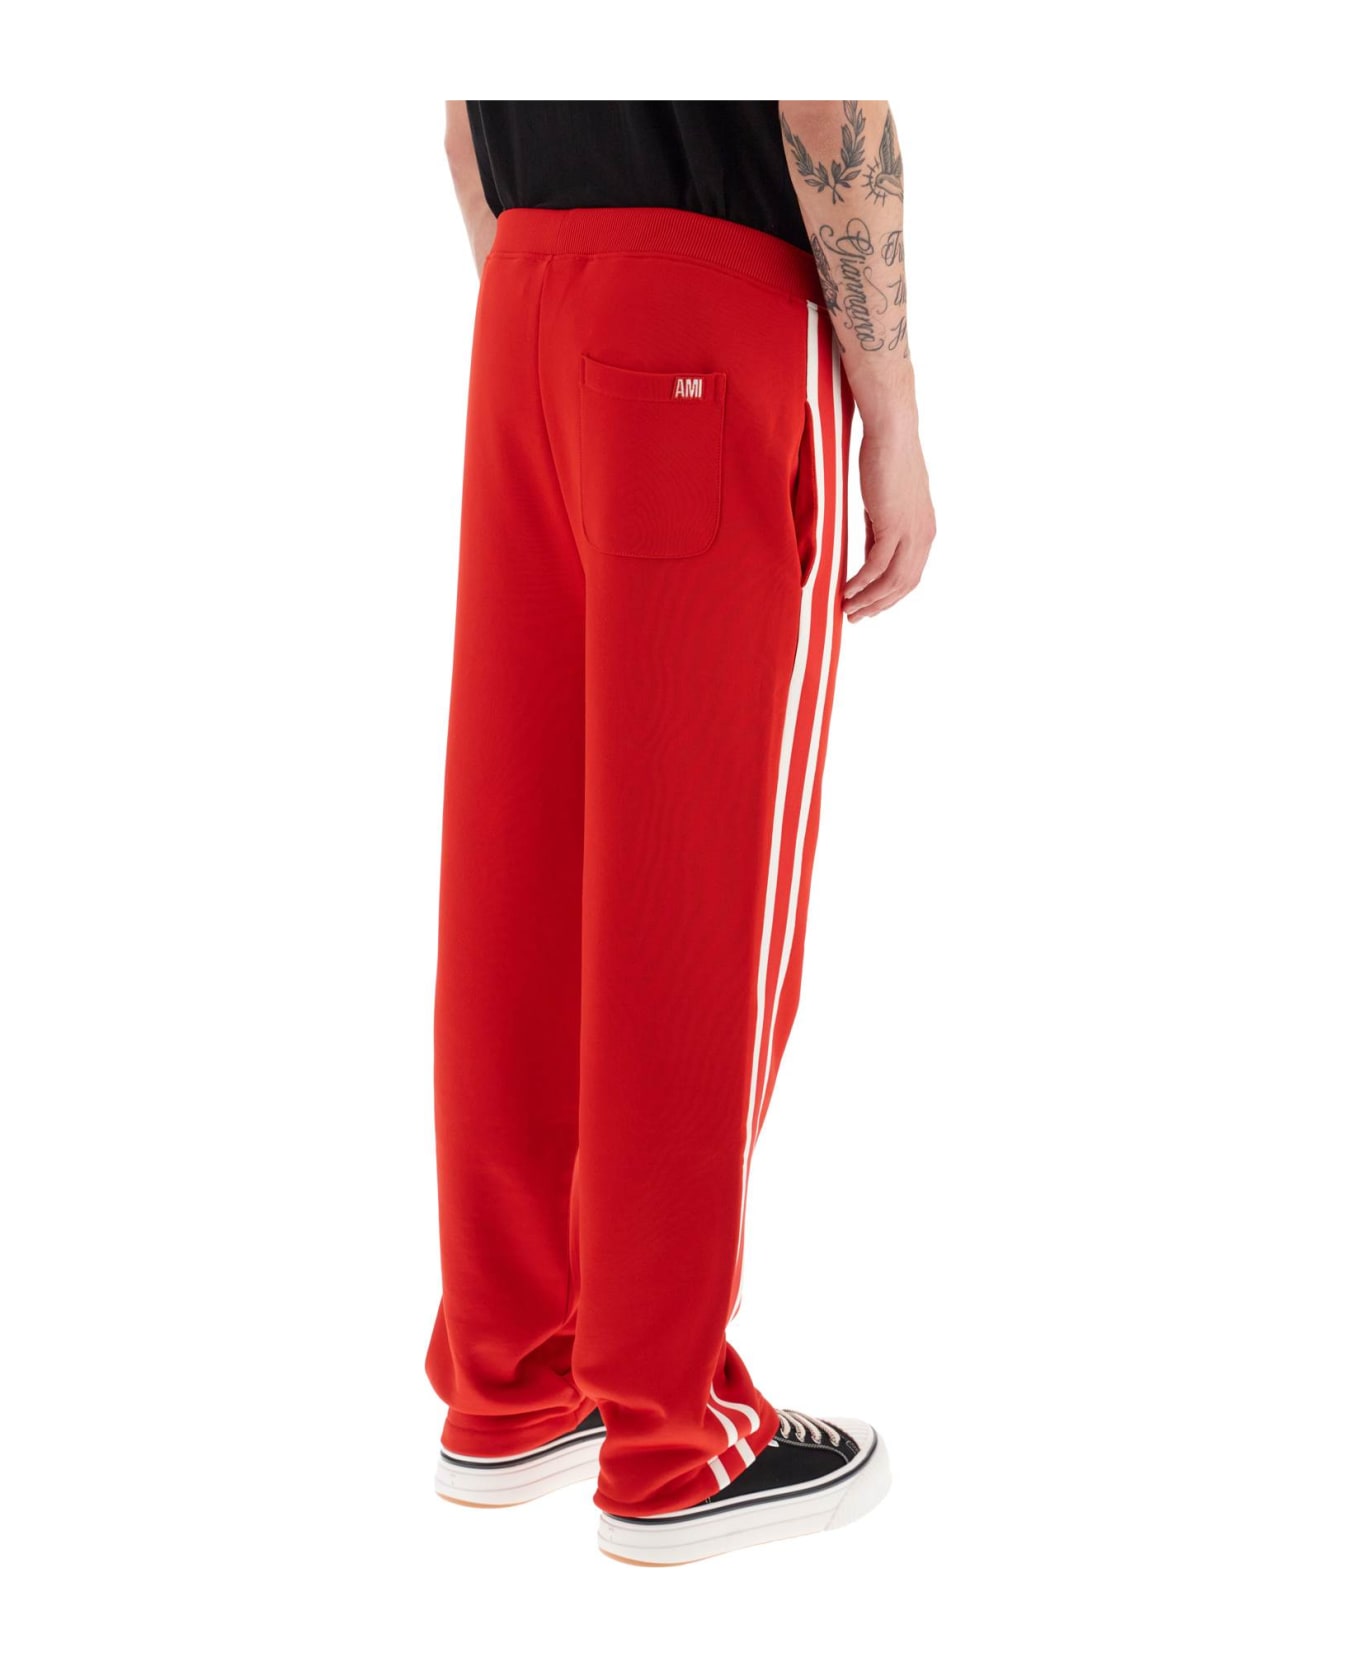 Ami Alexandre Mattiussi Track Pants With Side Bands - SCARLET RED (Red)